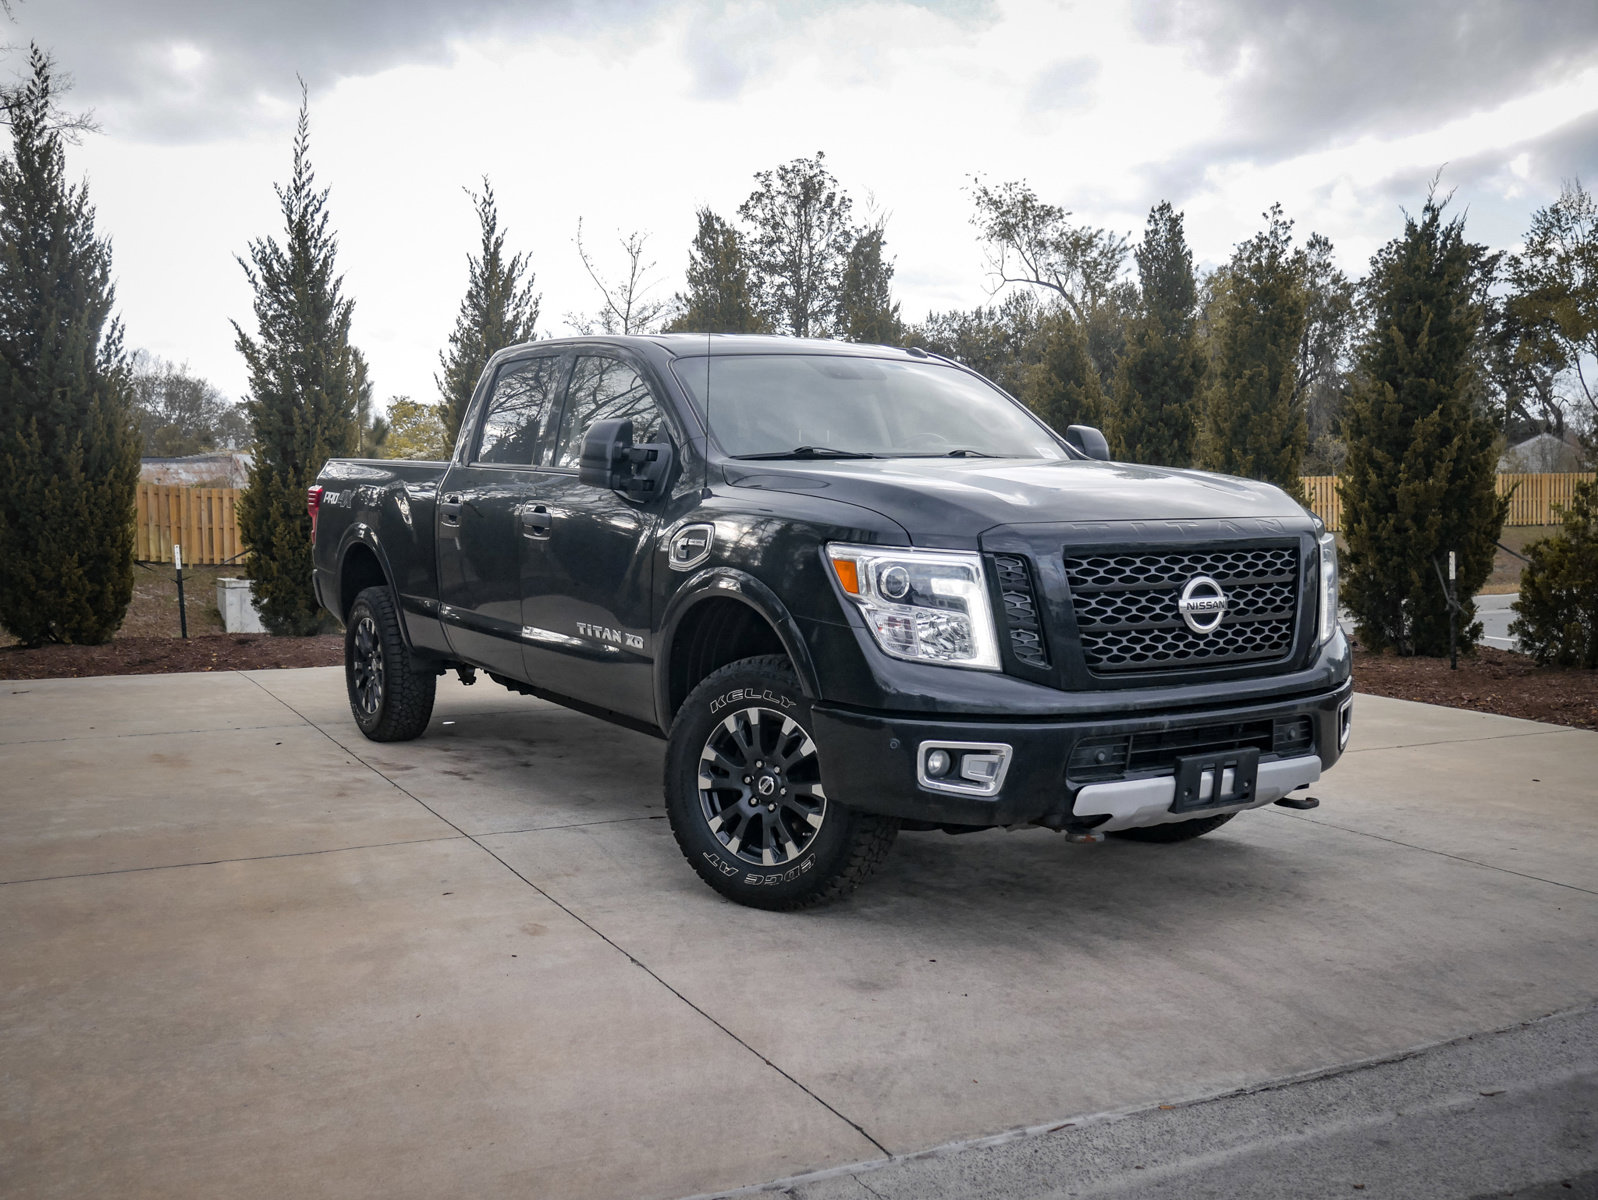 Pre-Owned 2017 Nissan Titan XD PRO-4X Pickup in Cary #P8155 | Hendrick  Dodge Cary